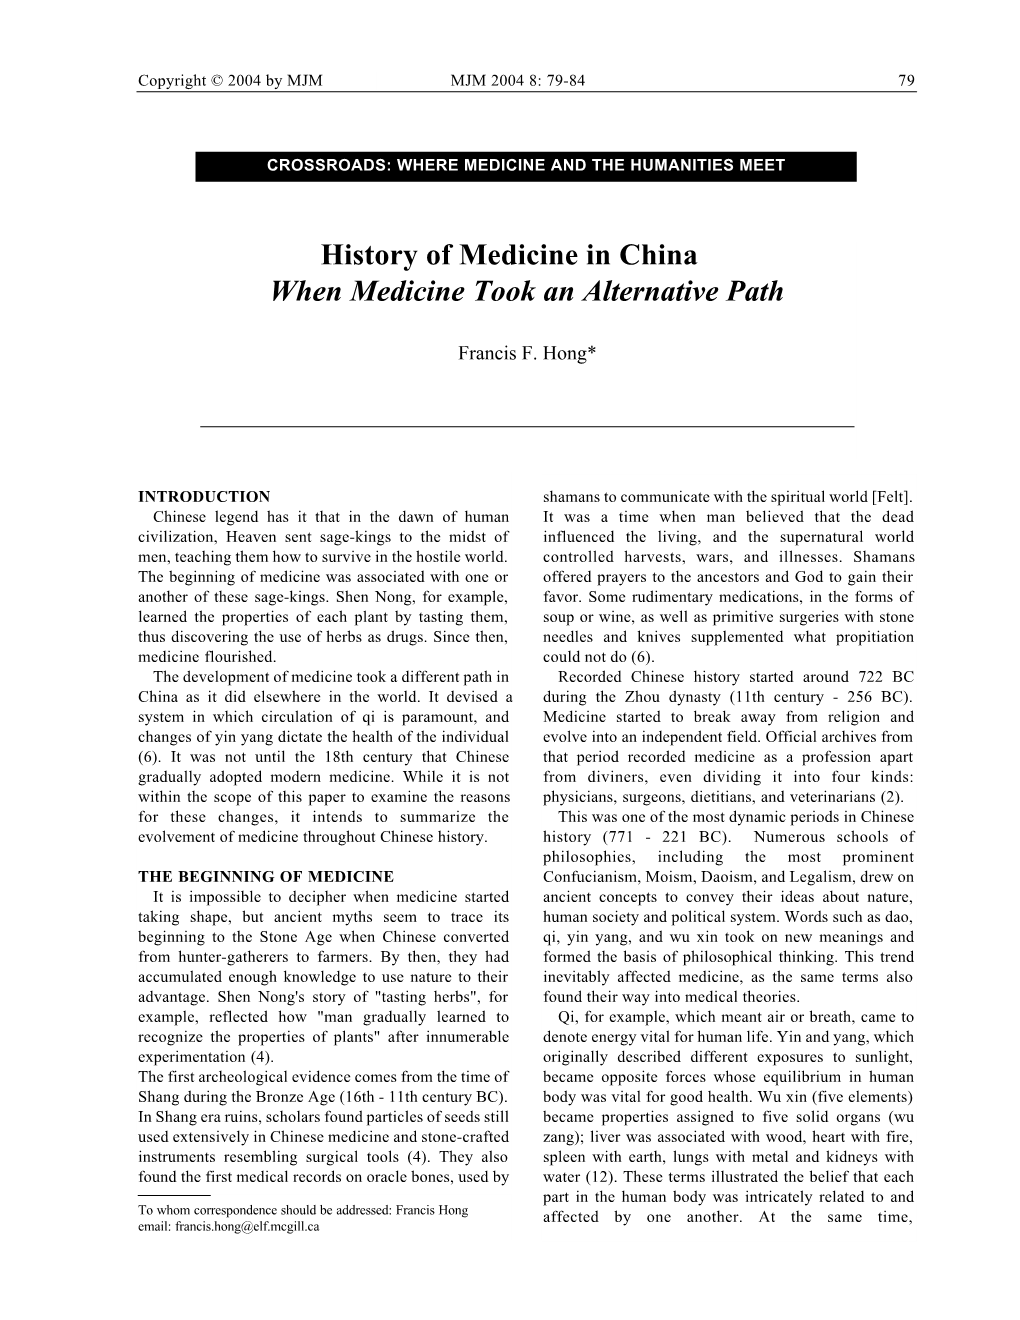 History of Medicine in China When Medicine Took an Alternative Path